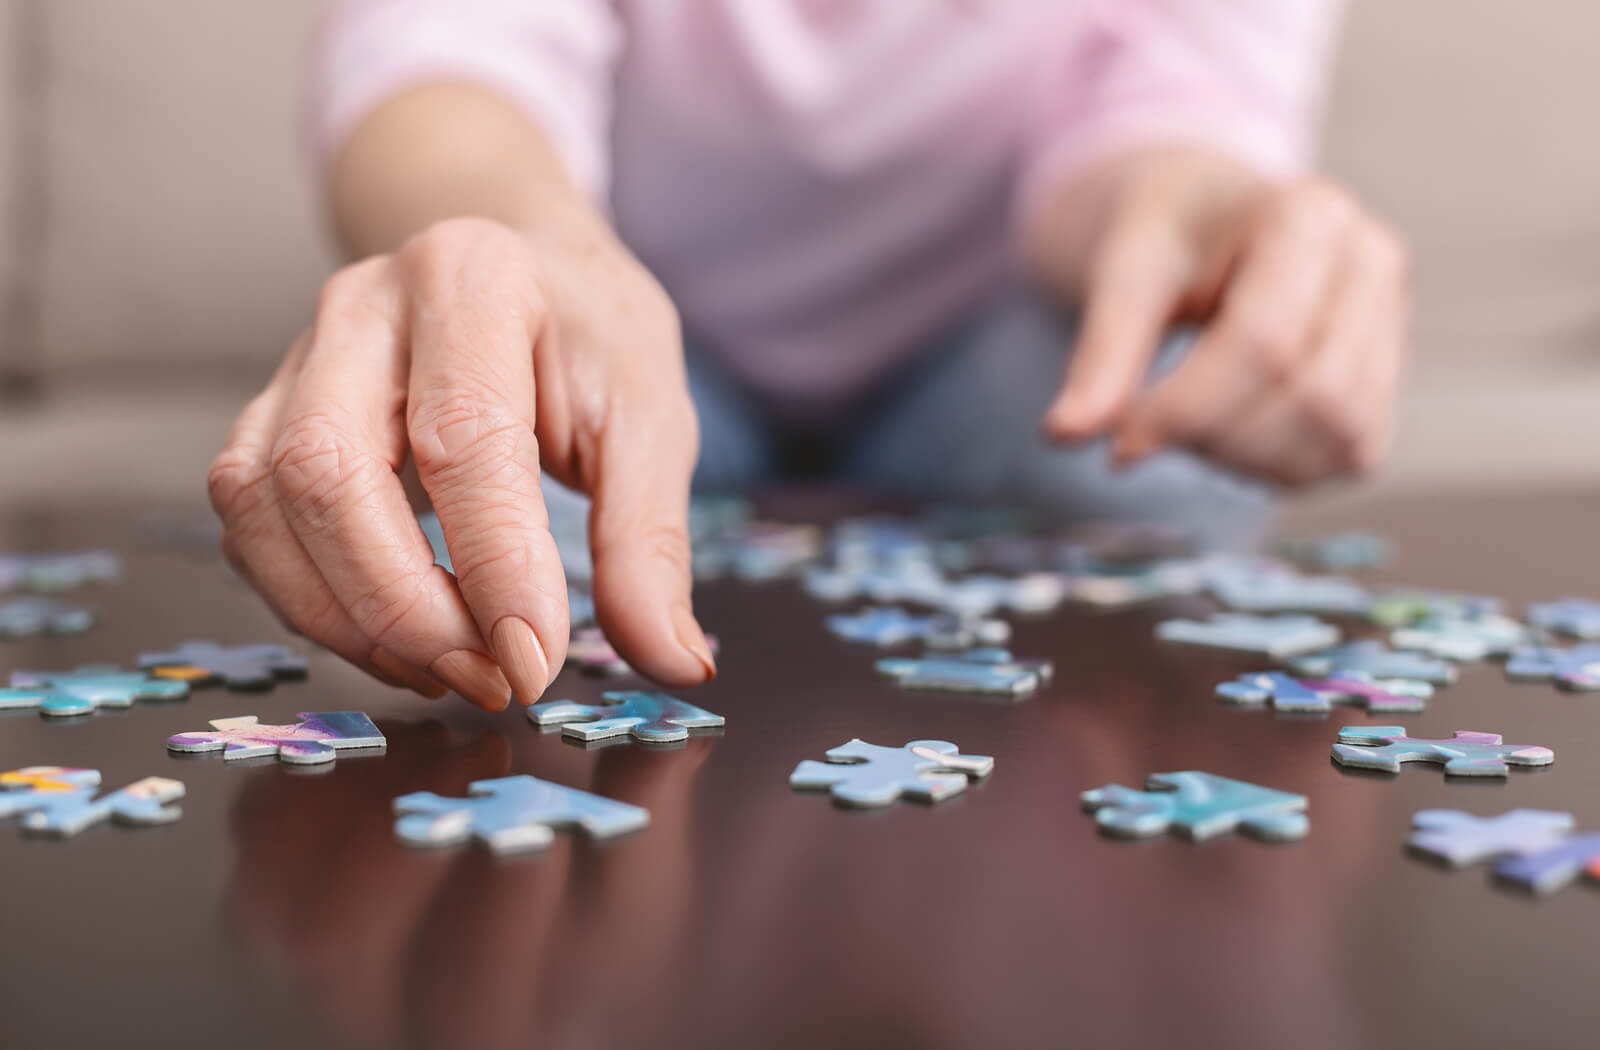 a close up of a woman's hands and puzzle pieces on a table. she is reaching for a puzzle piece